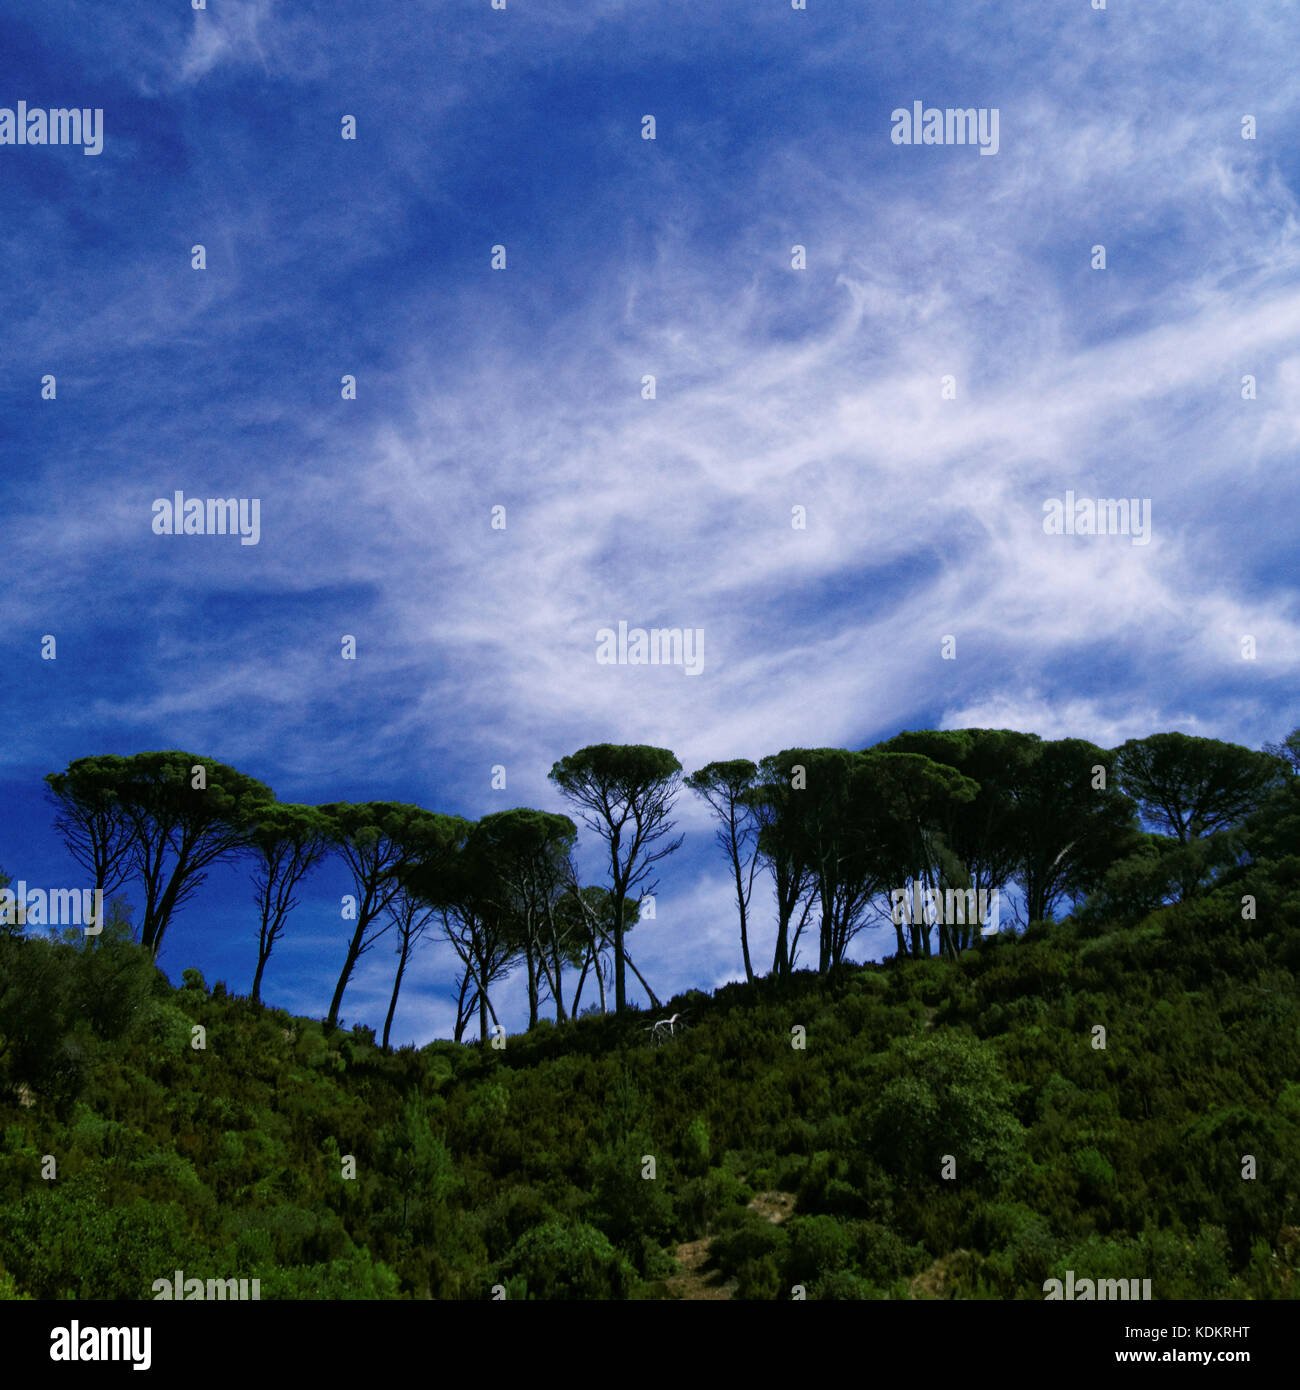 Group of trees and sky with clouds Stock Photo